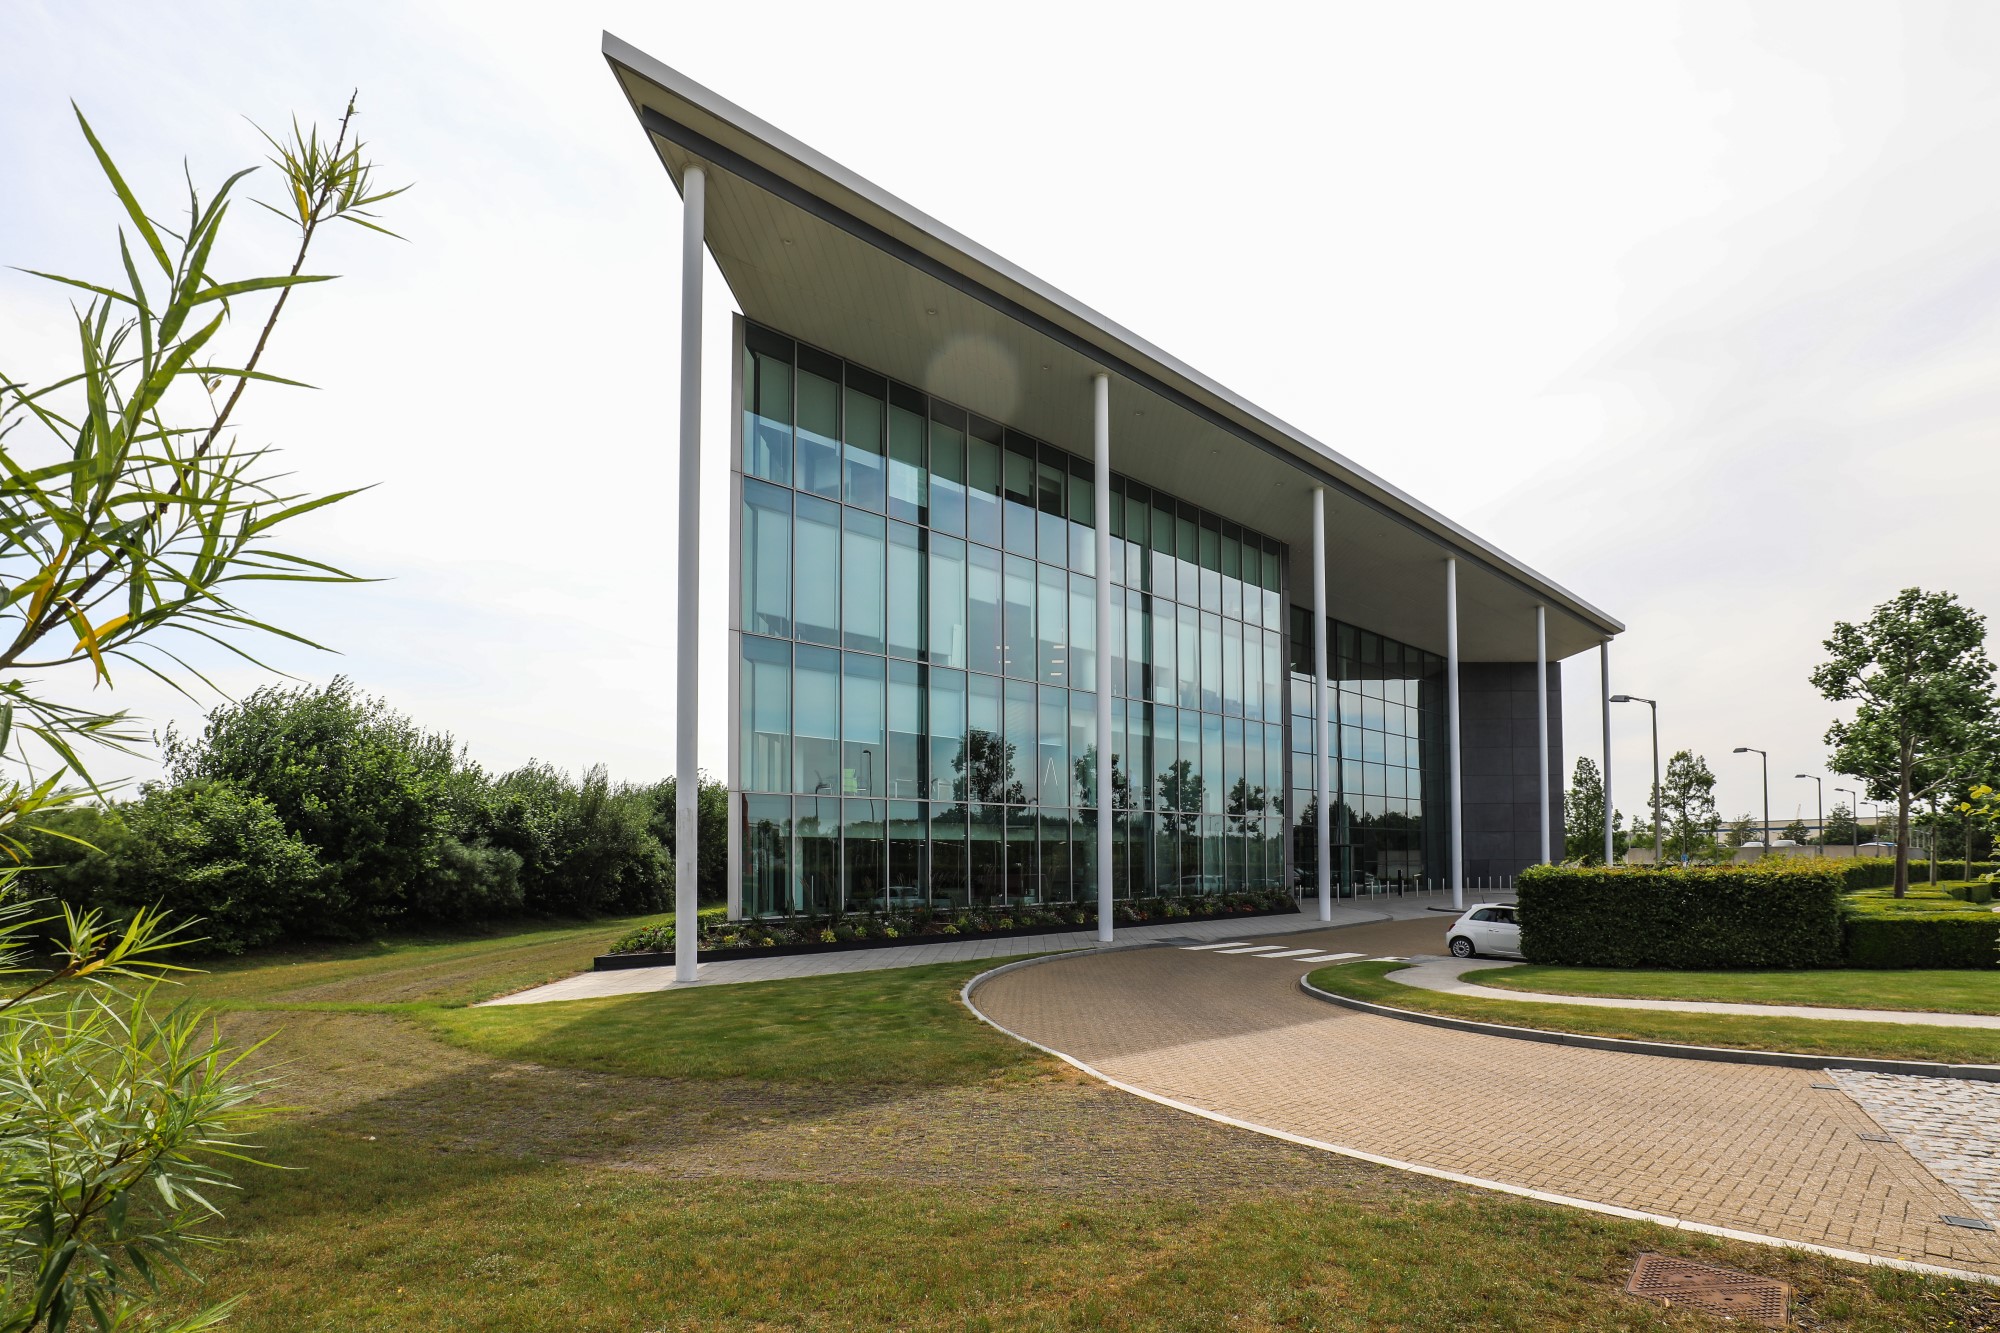 World-leading technology company moves to Farnborough Business Park